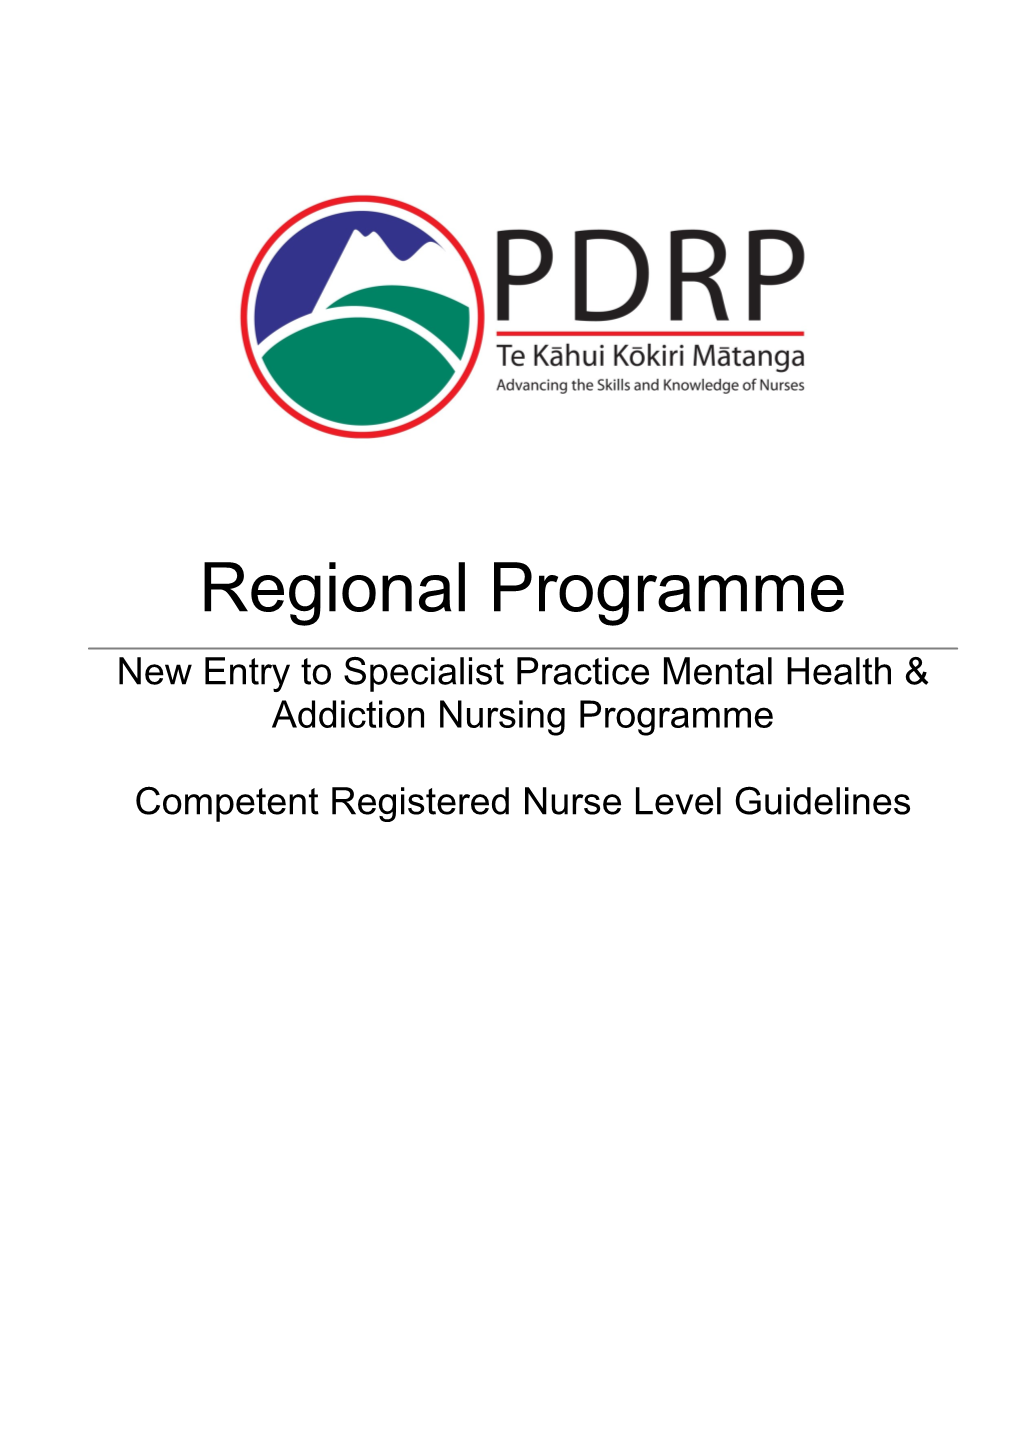 We Acknowledge the Following in the Development of the PDRP Guidelines